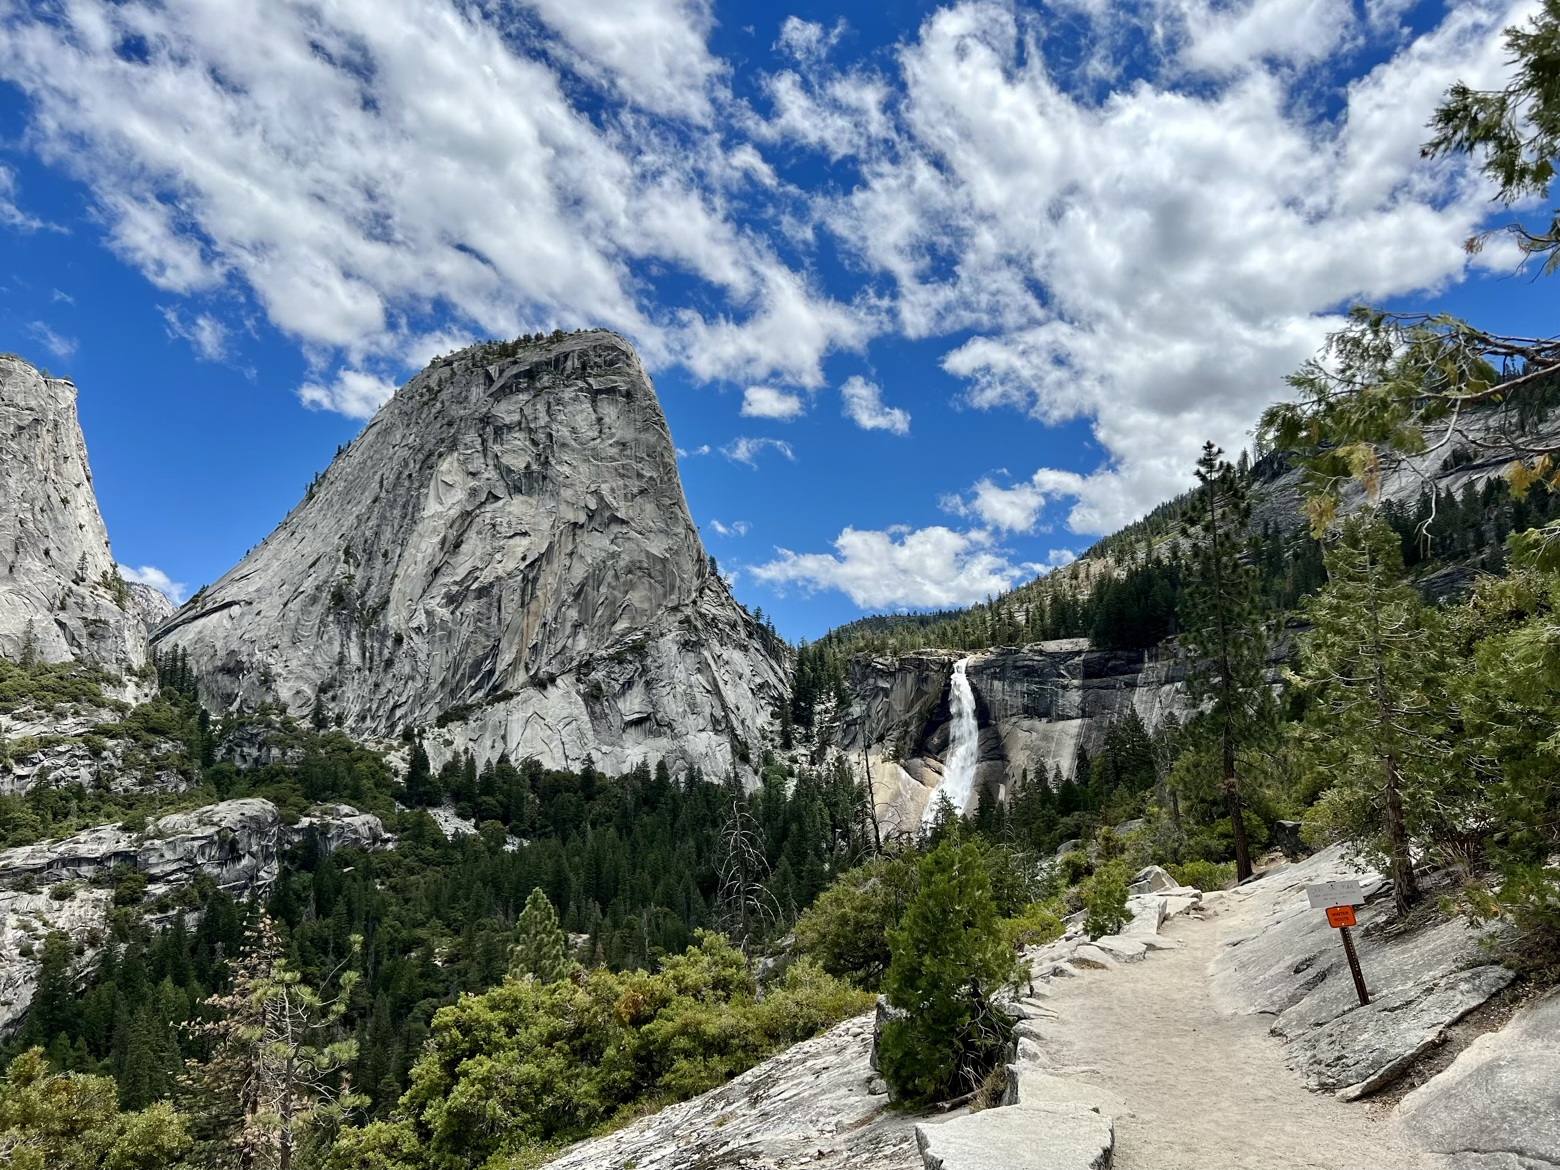 Clark Point view of Liberty Cap and Nevada Falls